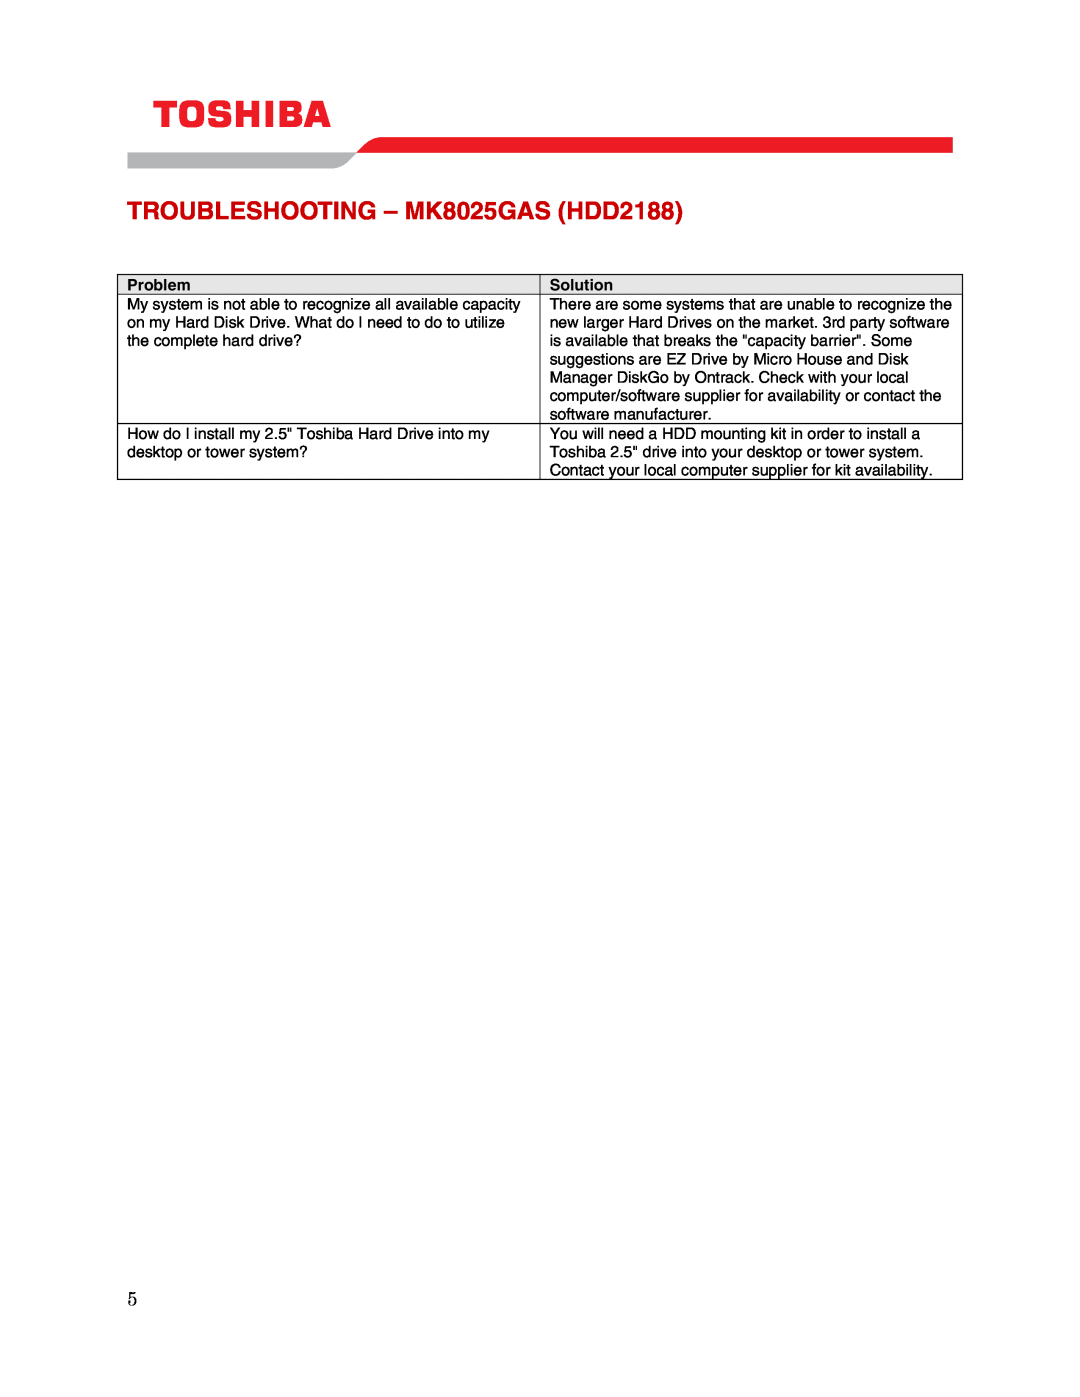 Toshiba user manual TROUBLESHOOTING - MK8025GAS HDD2188, Problem, Solution 